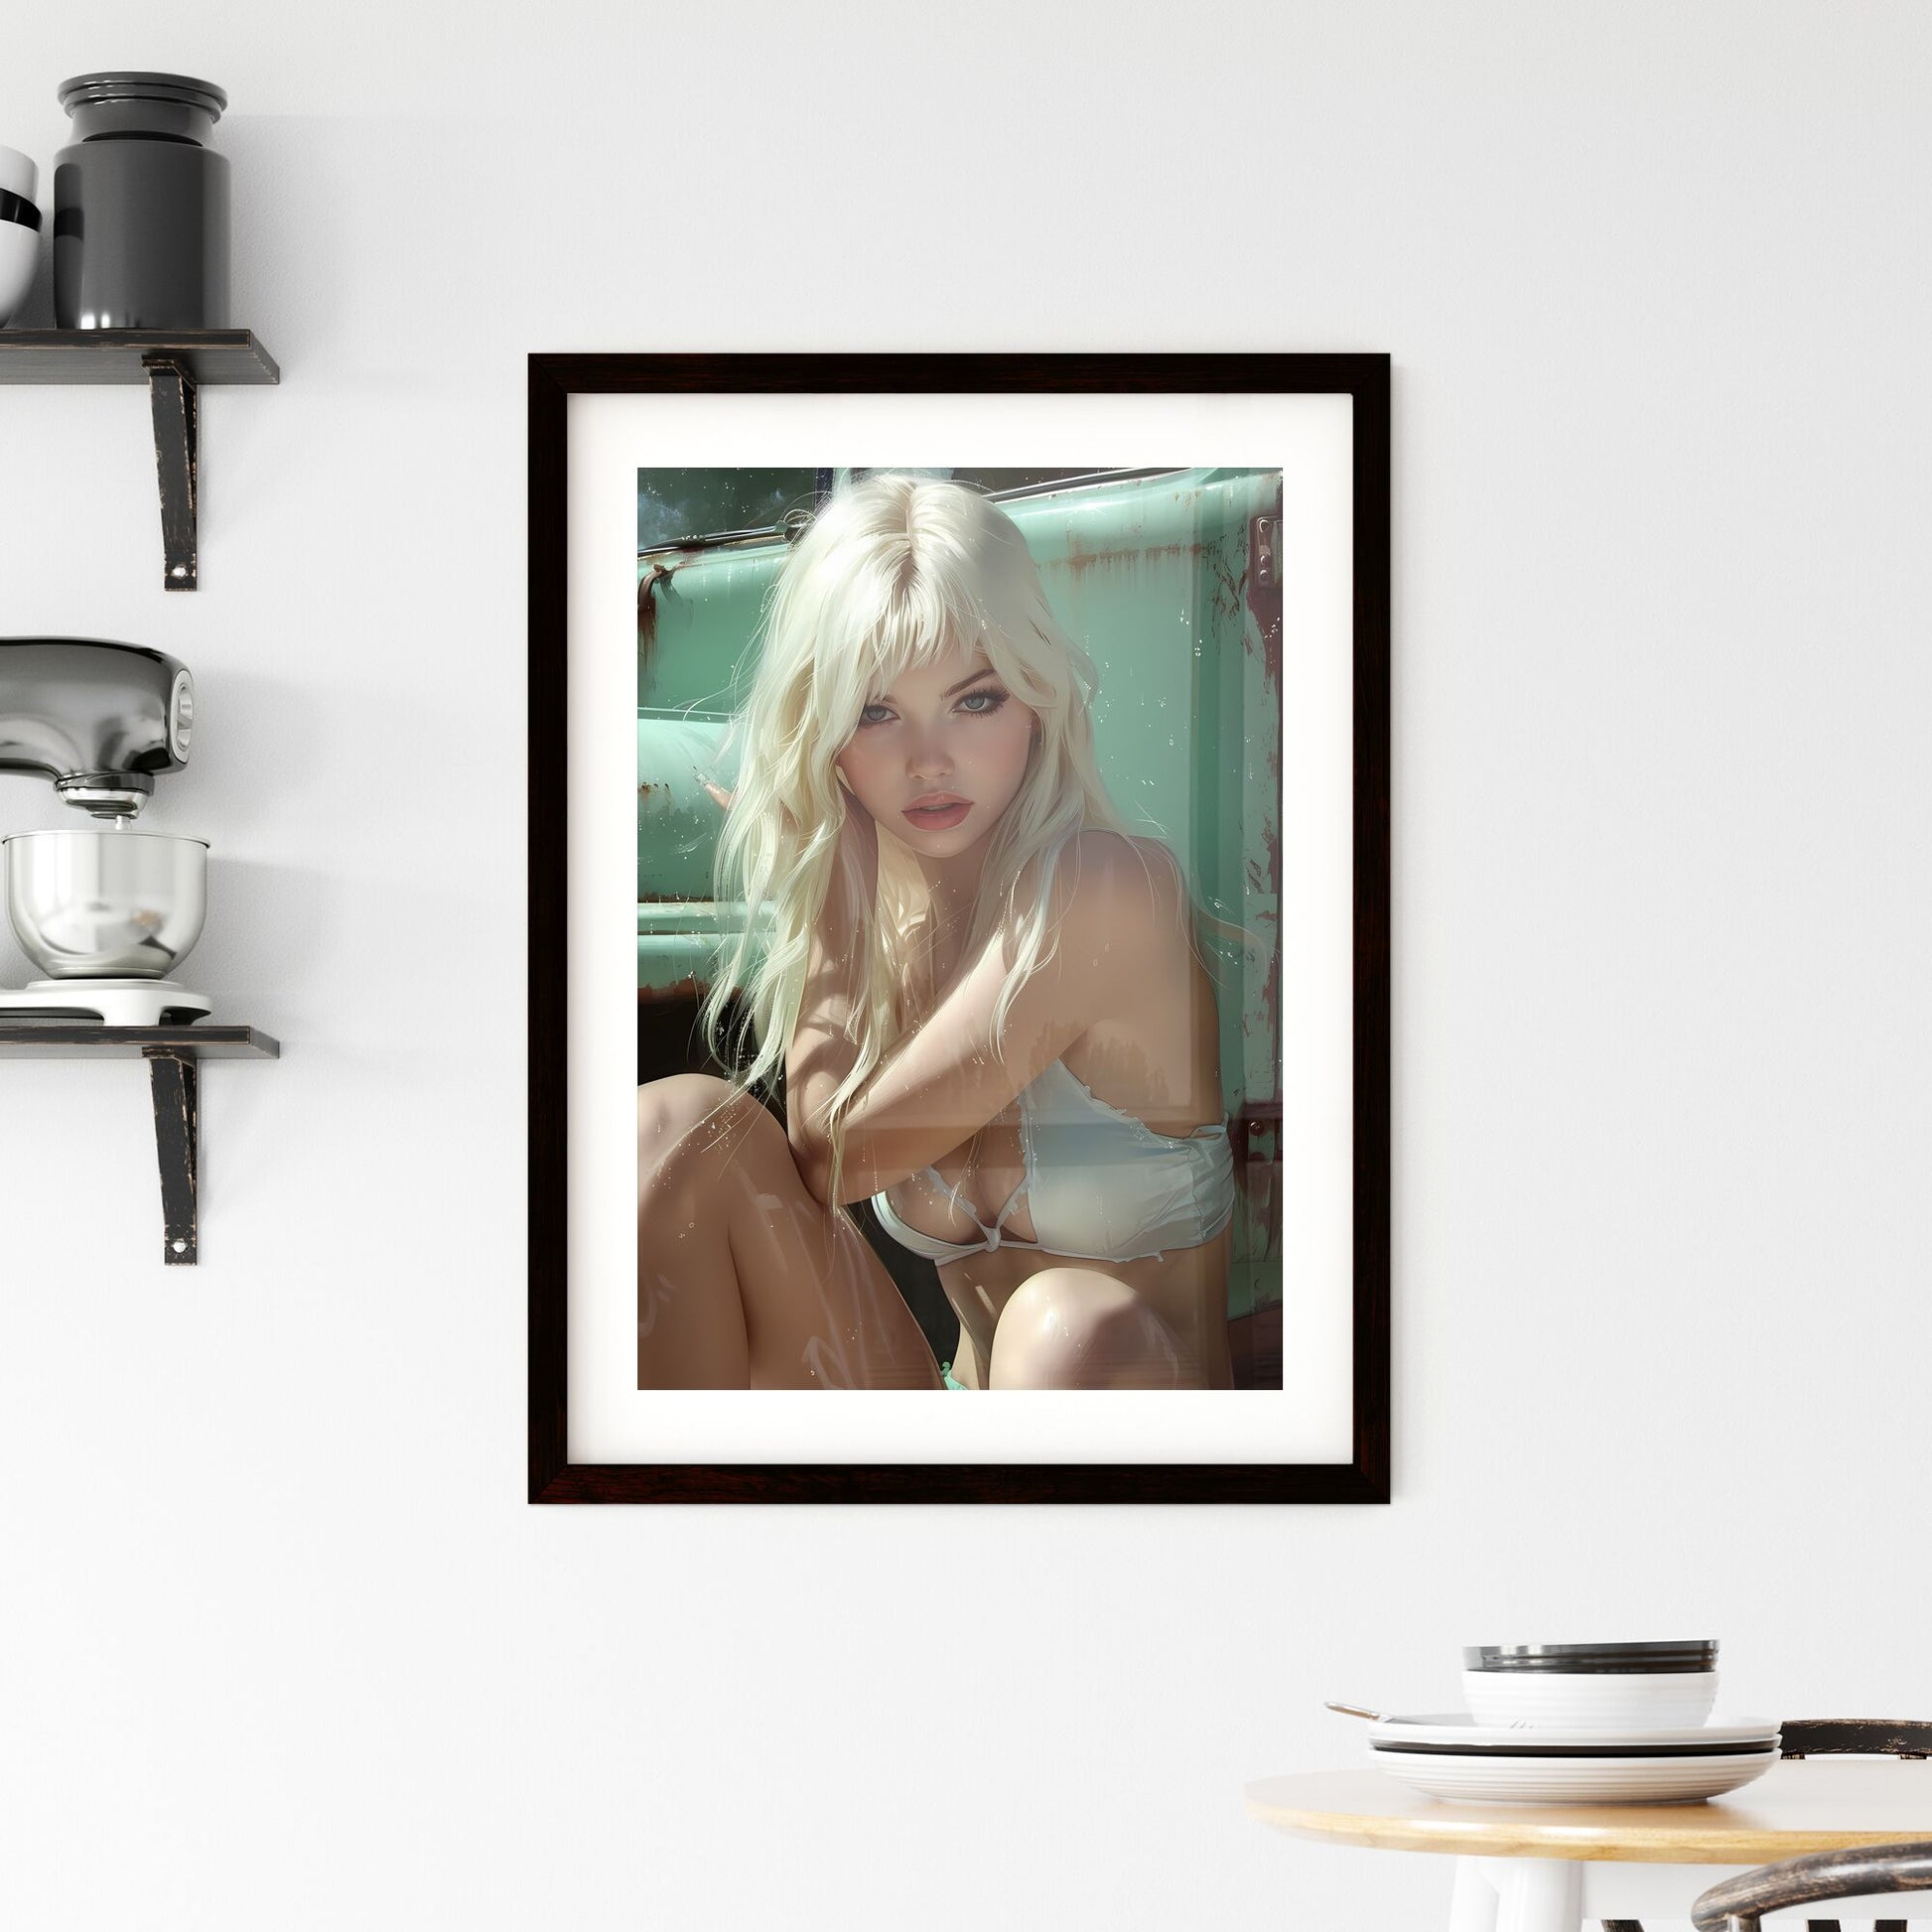 Sitting pin up factory worker girl,looking amazing - Art print of a woman in a garment posing for a picture Default Title